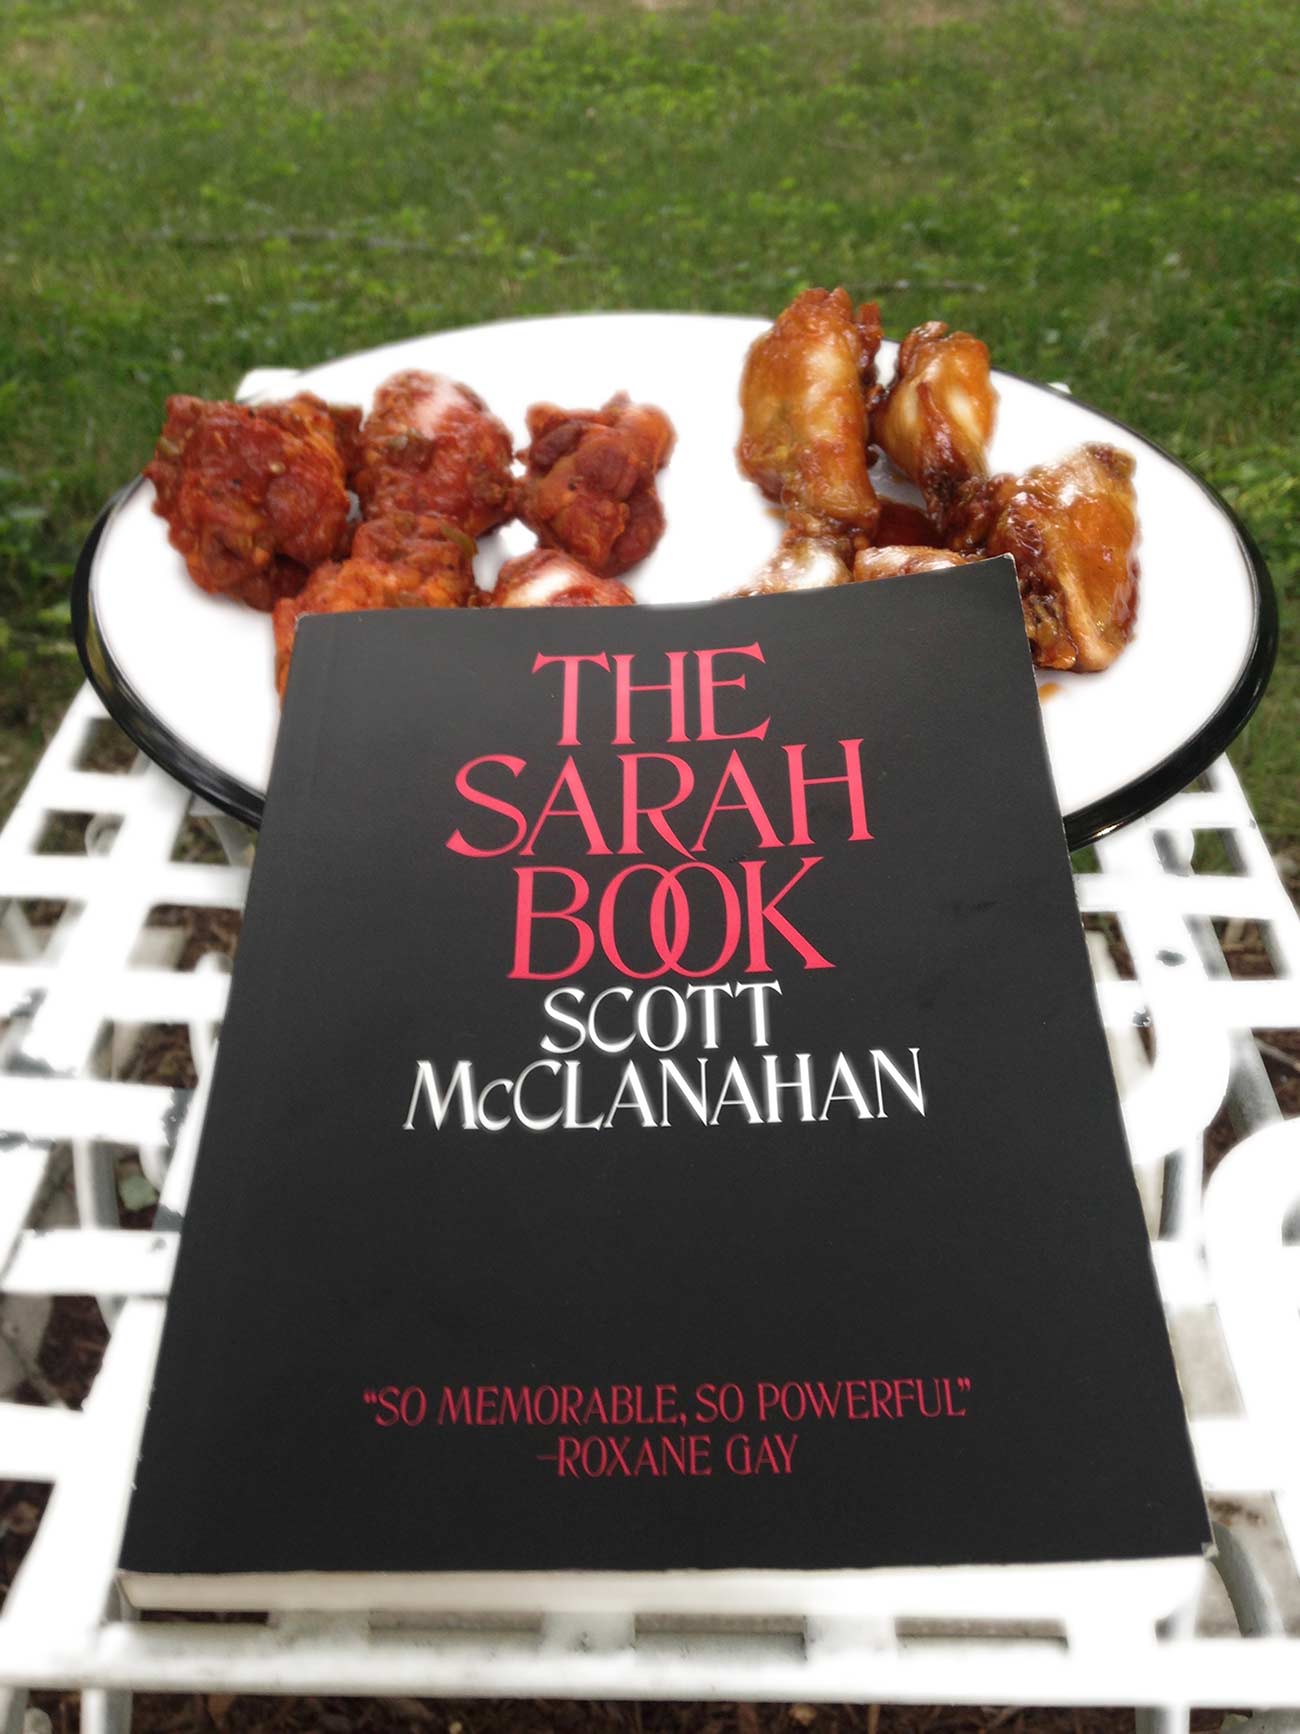 the sarah book and chicken wings